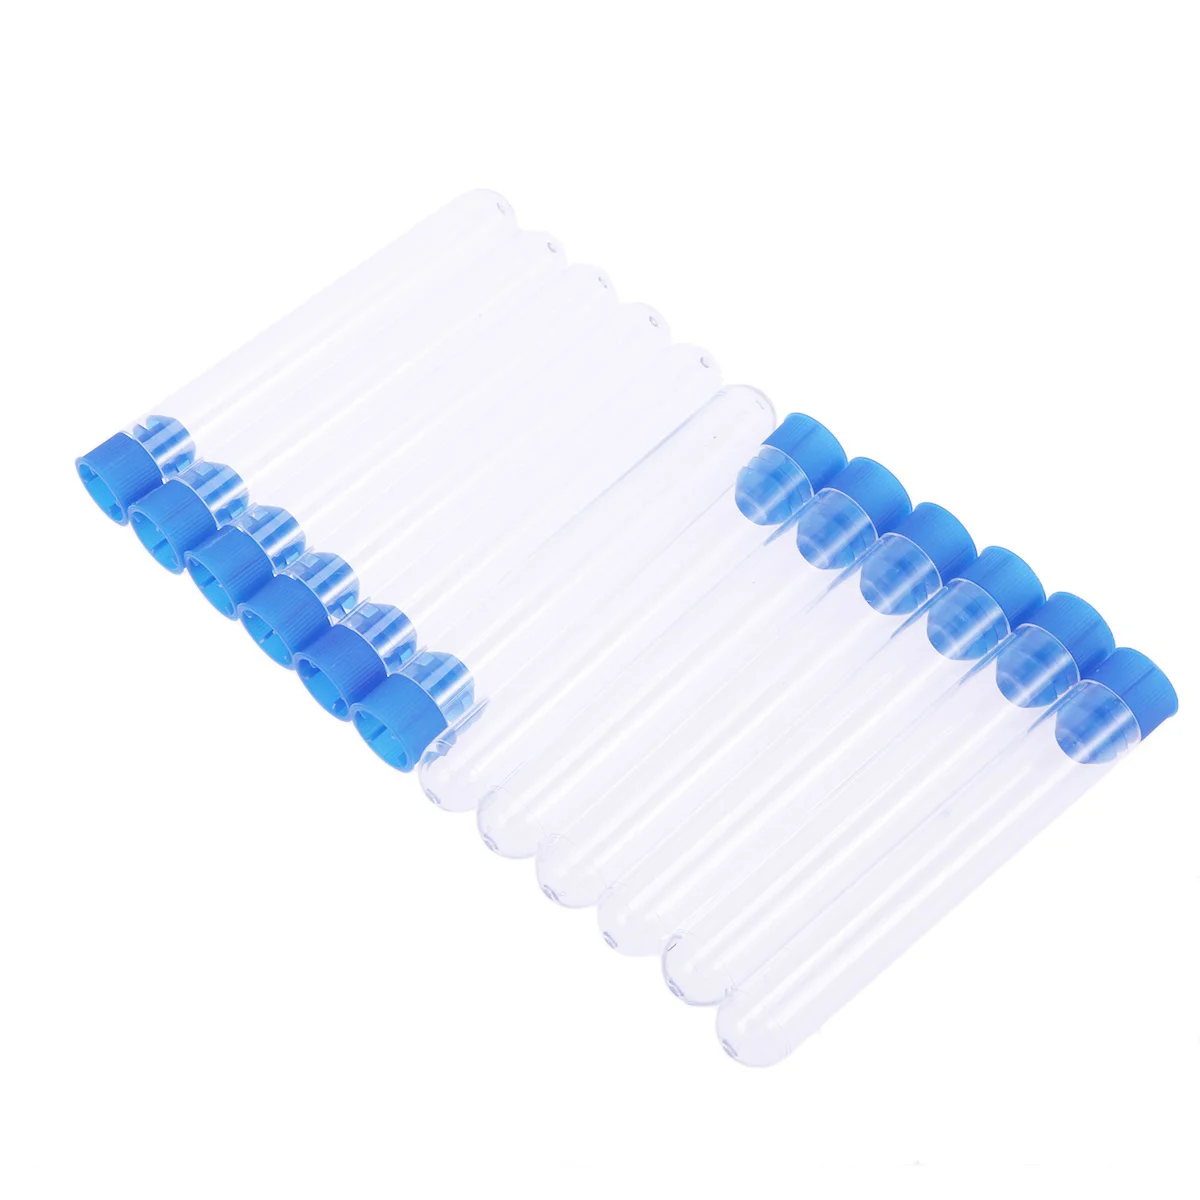 

12 Pcs/Pack 16x150mm Plastic Clear Test Tube with Stopper for Scientific Experiments Party Candy Storage with Stopper (Random